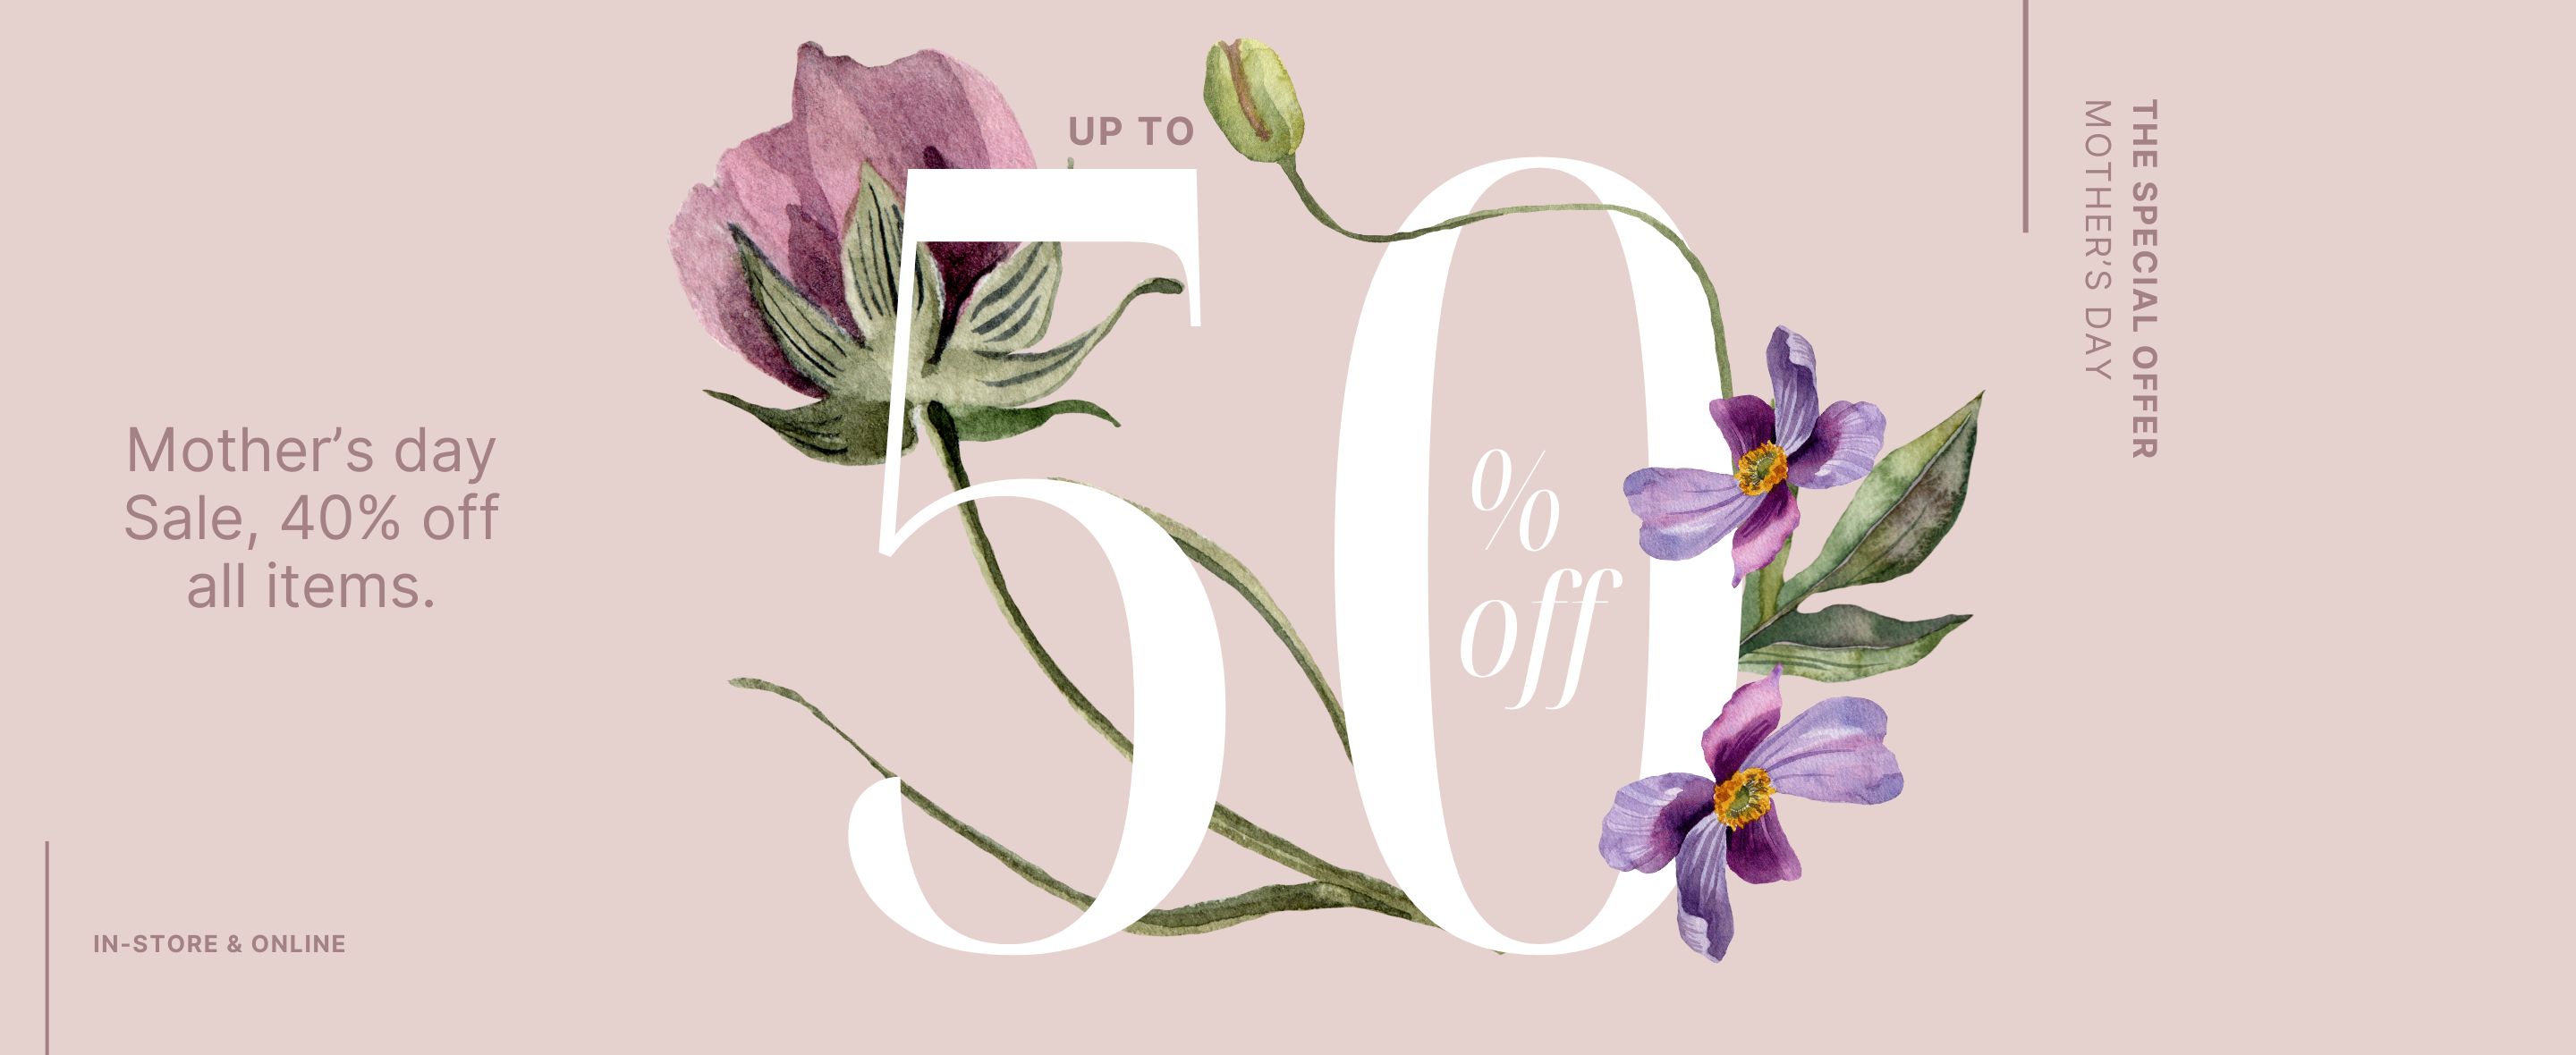 Up to 50% off best offers